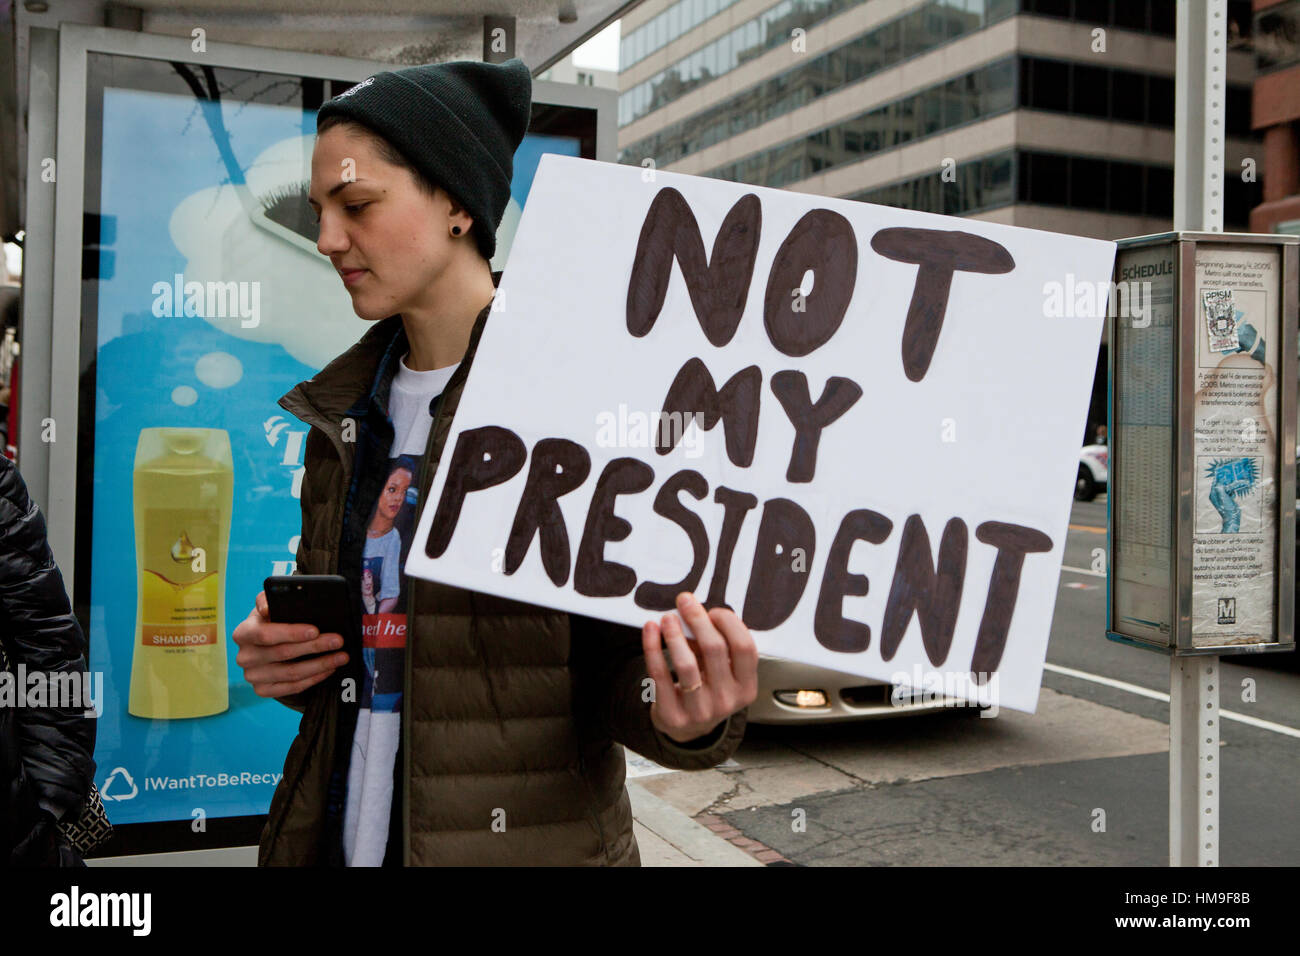 Jan. 20th, 2016, Washington, DC USA: Woman holding 'Not My President' sign during 2017 presidential inauguration protest Stock Photo